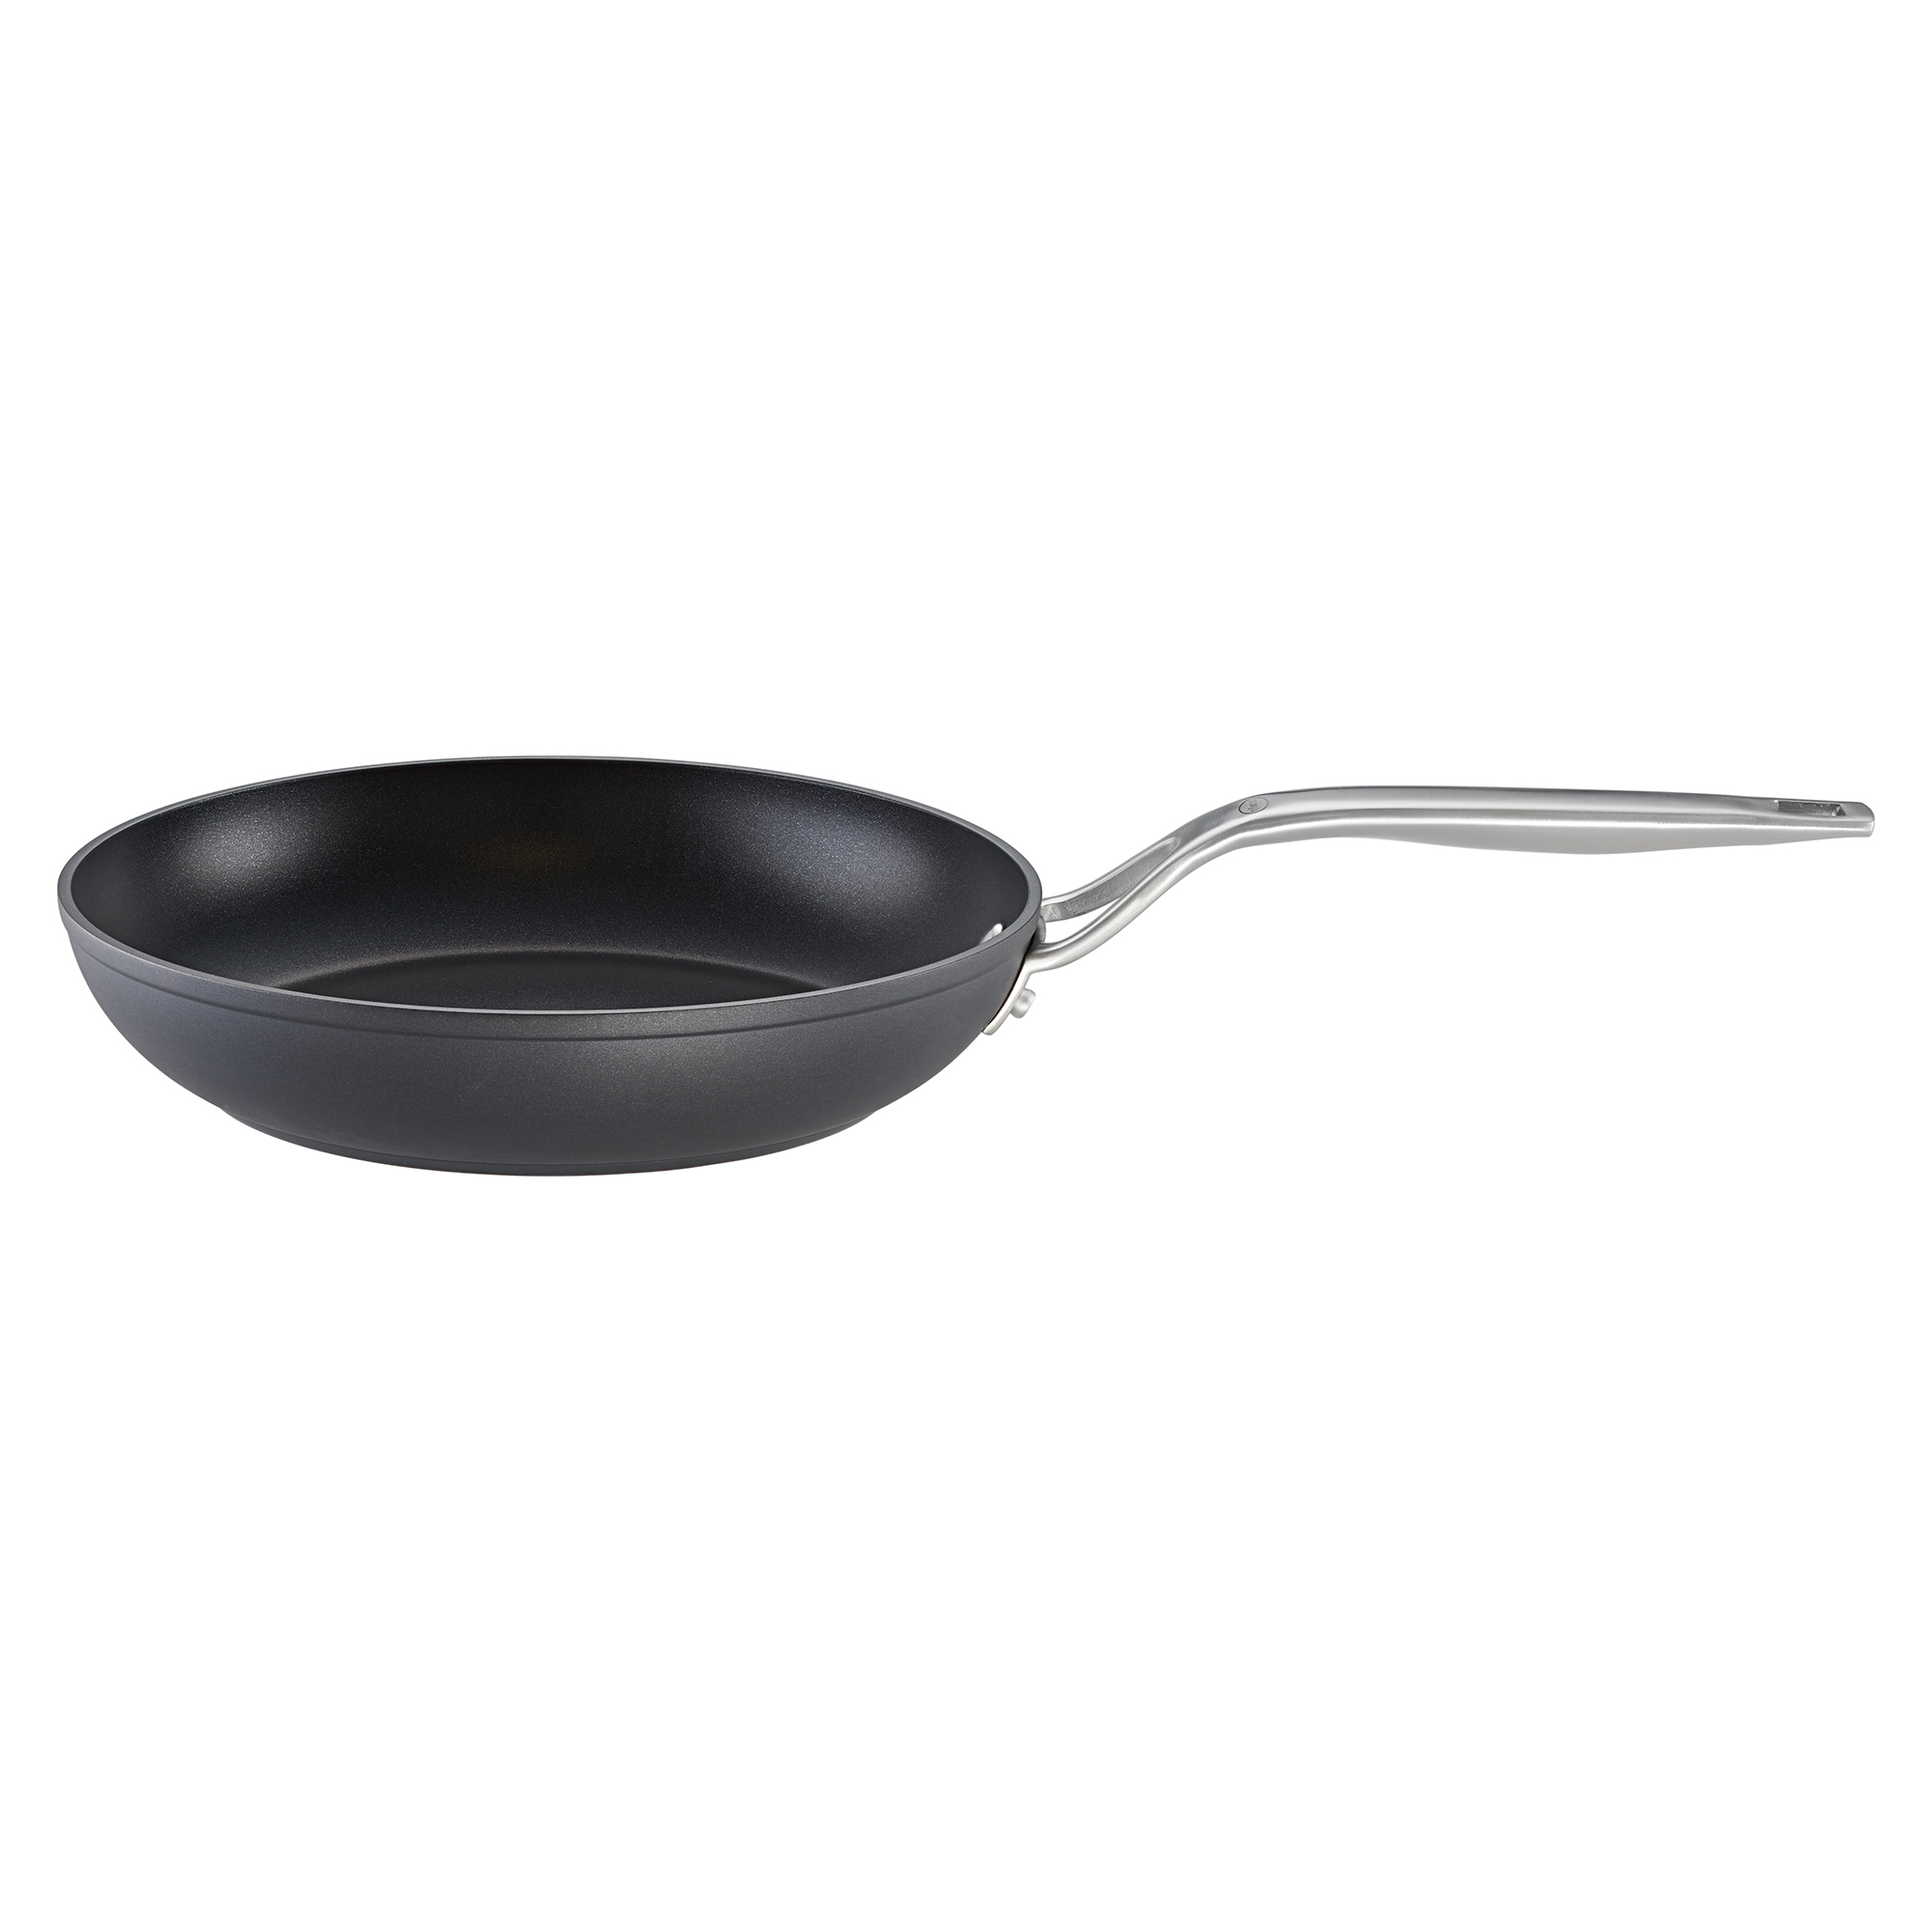 Frying Pan "Raise" Ø 28 cm | 11.0 in. from forged aluminum with non-stick coating ProPlex®